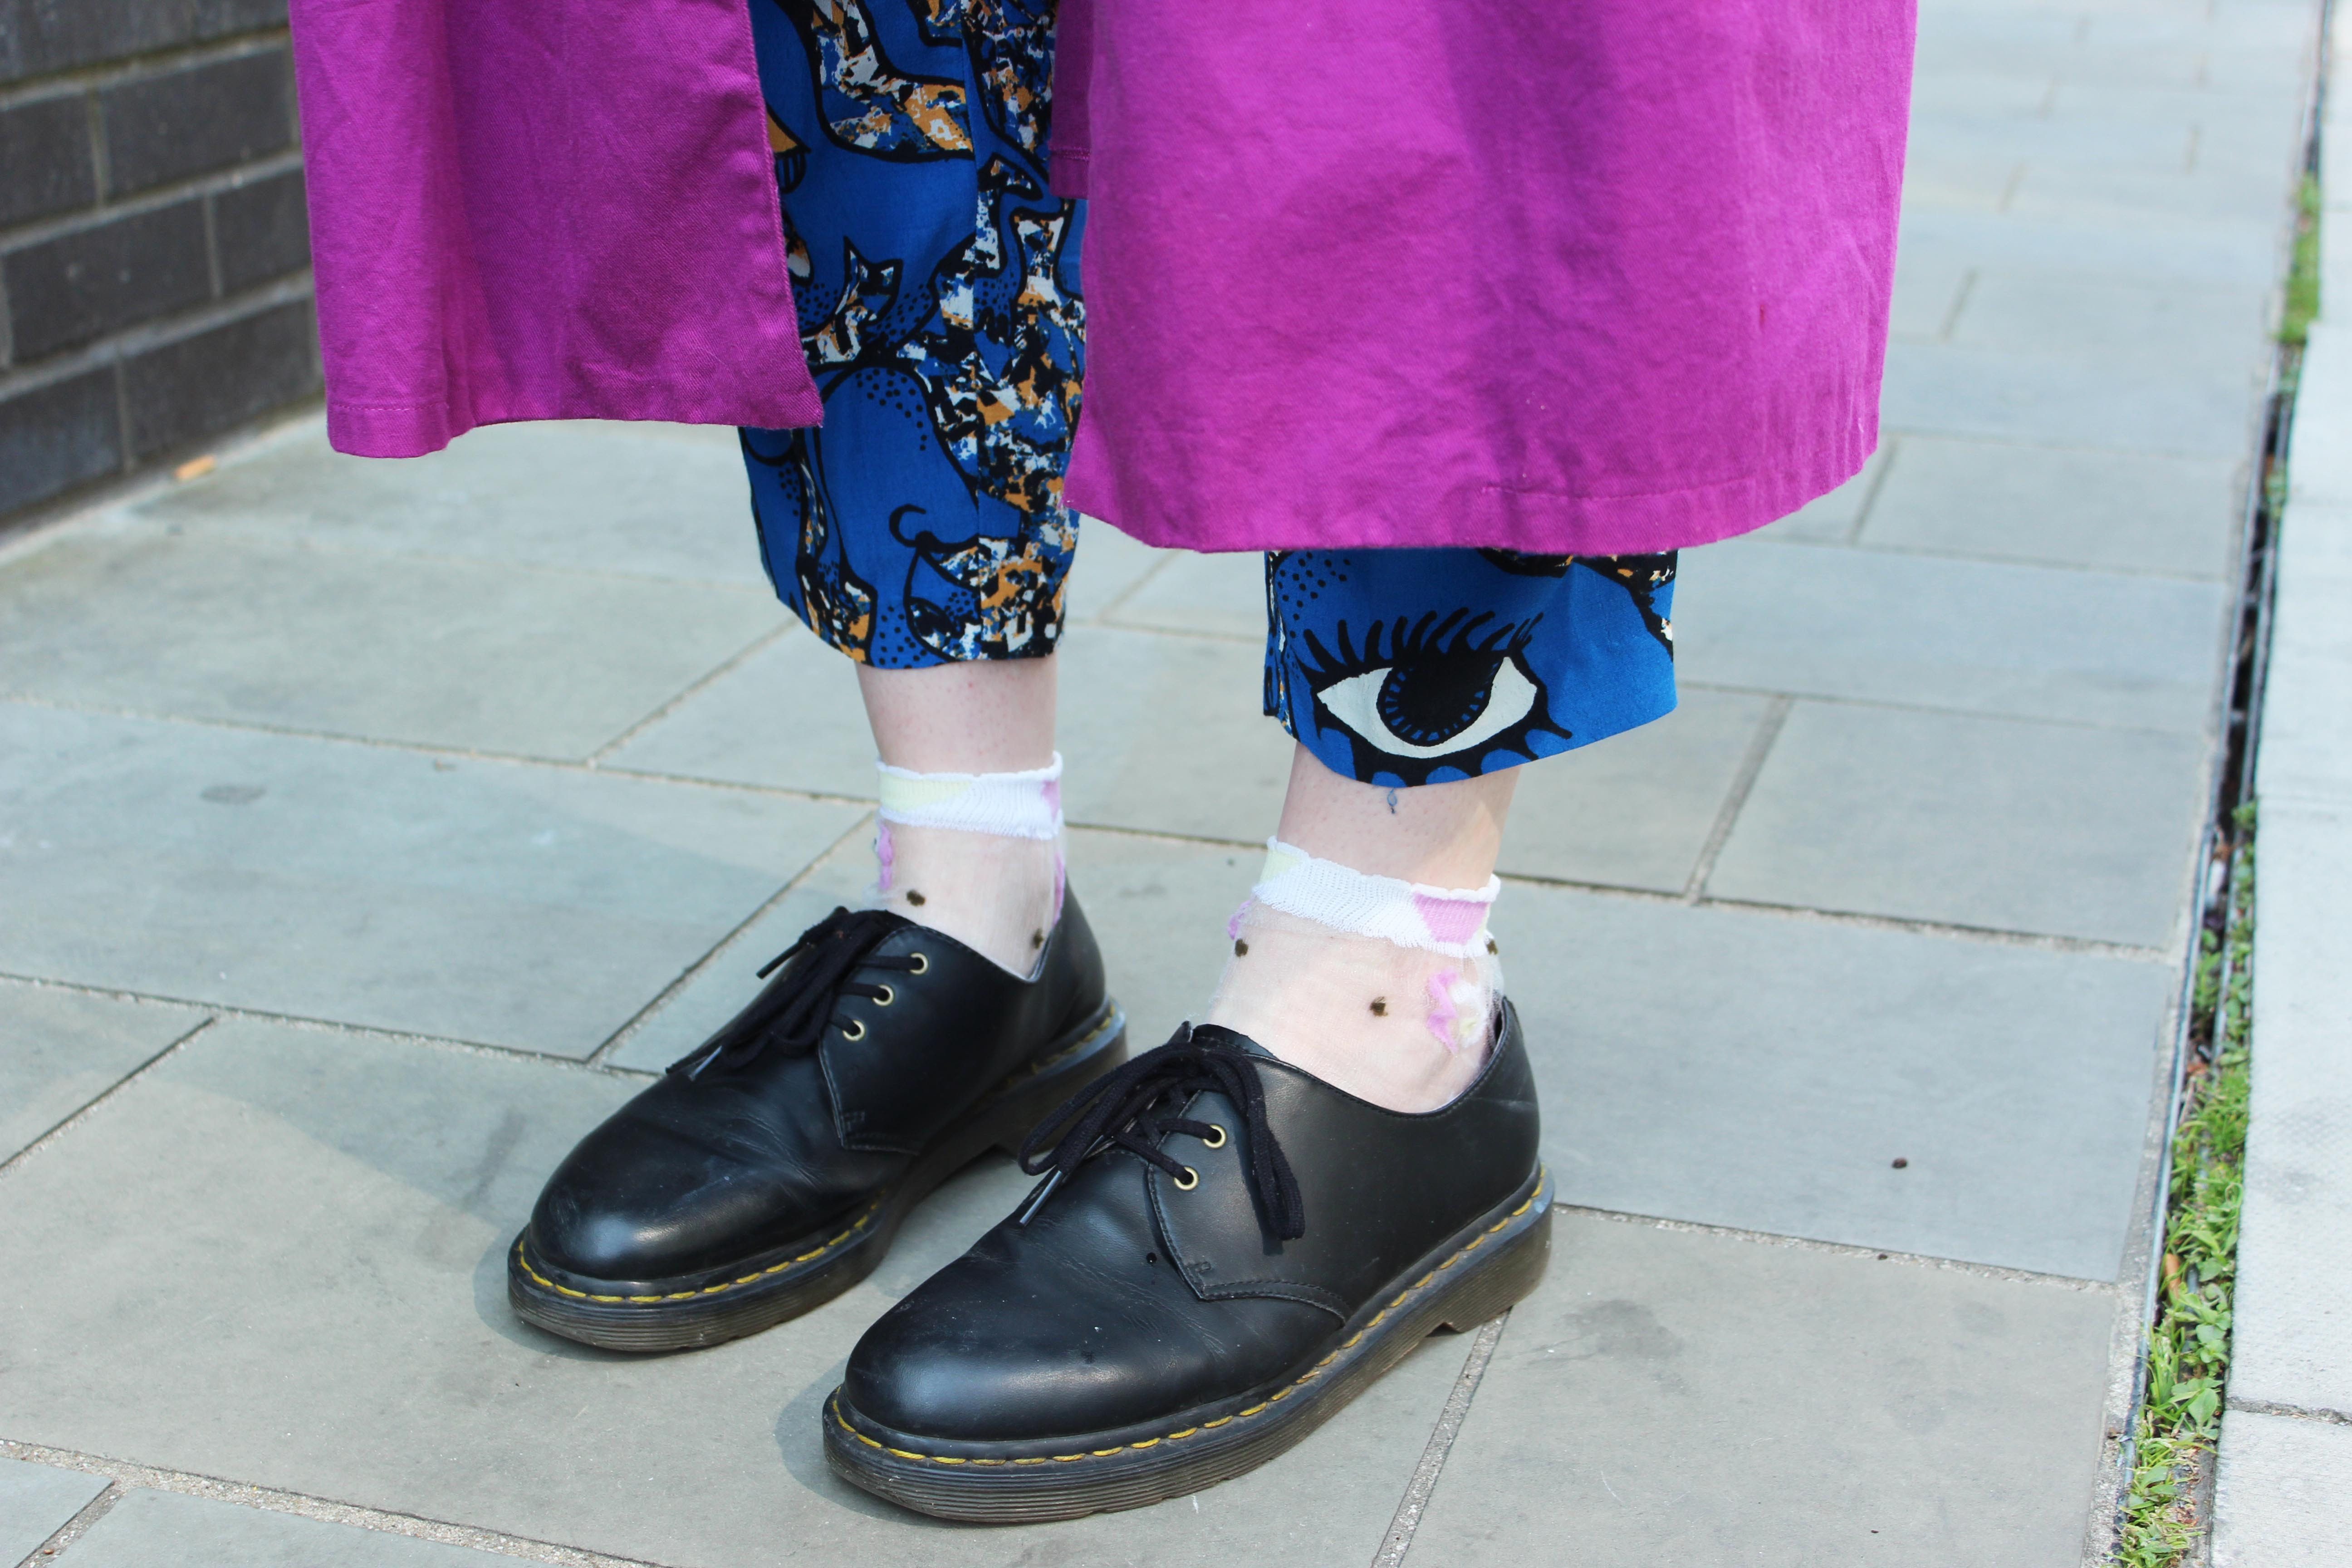 Vegan Dr Marten shoes with socks and printed trousers